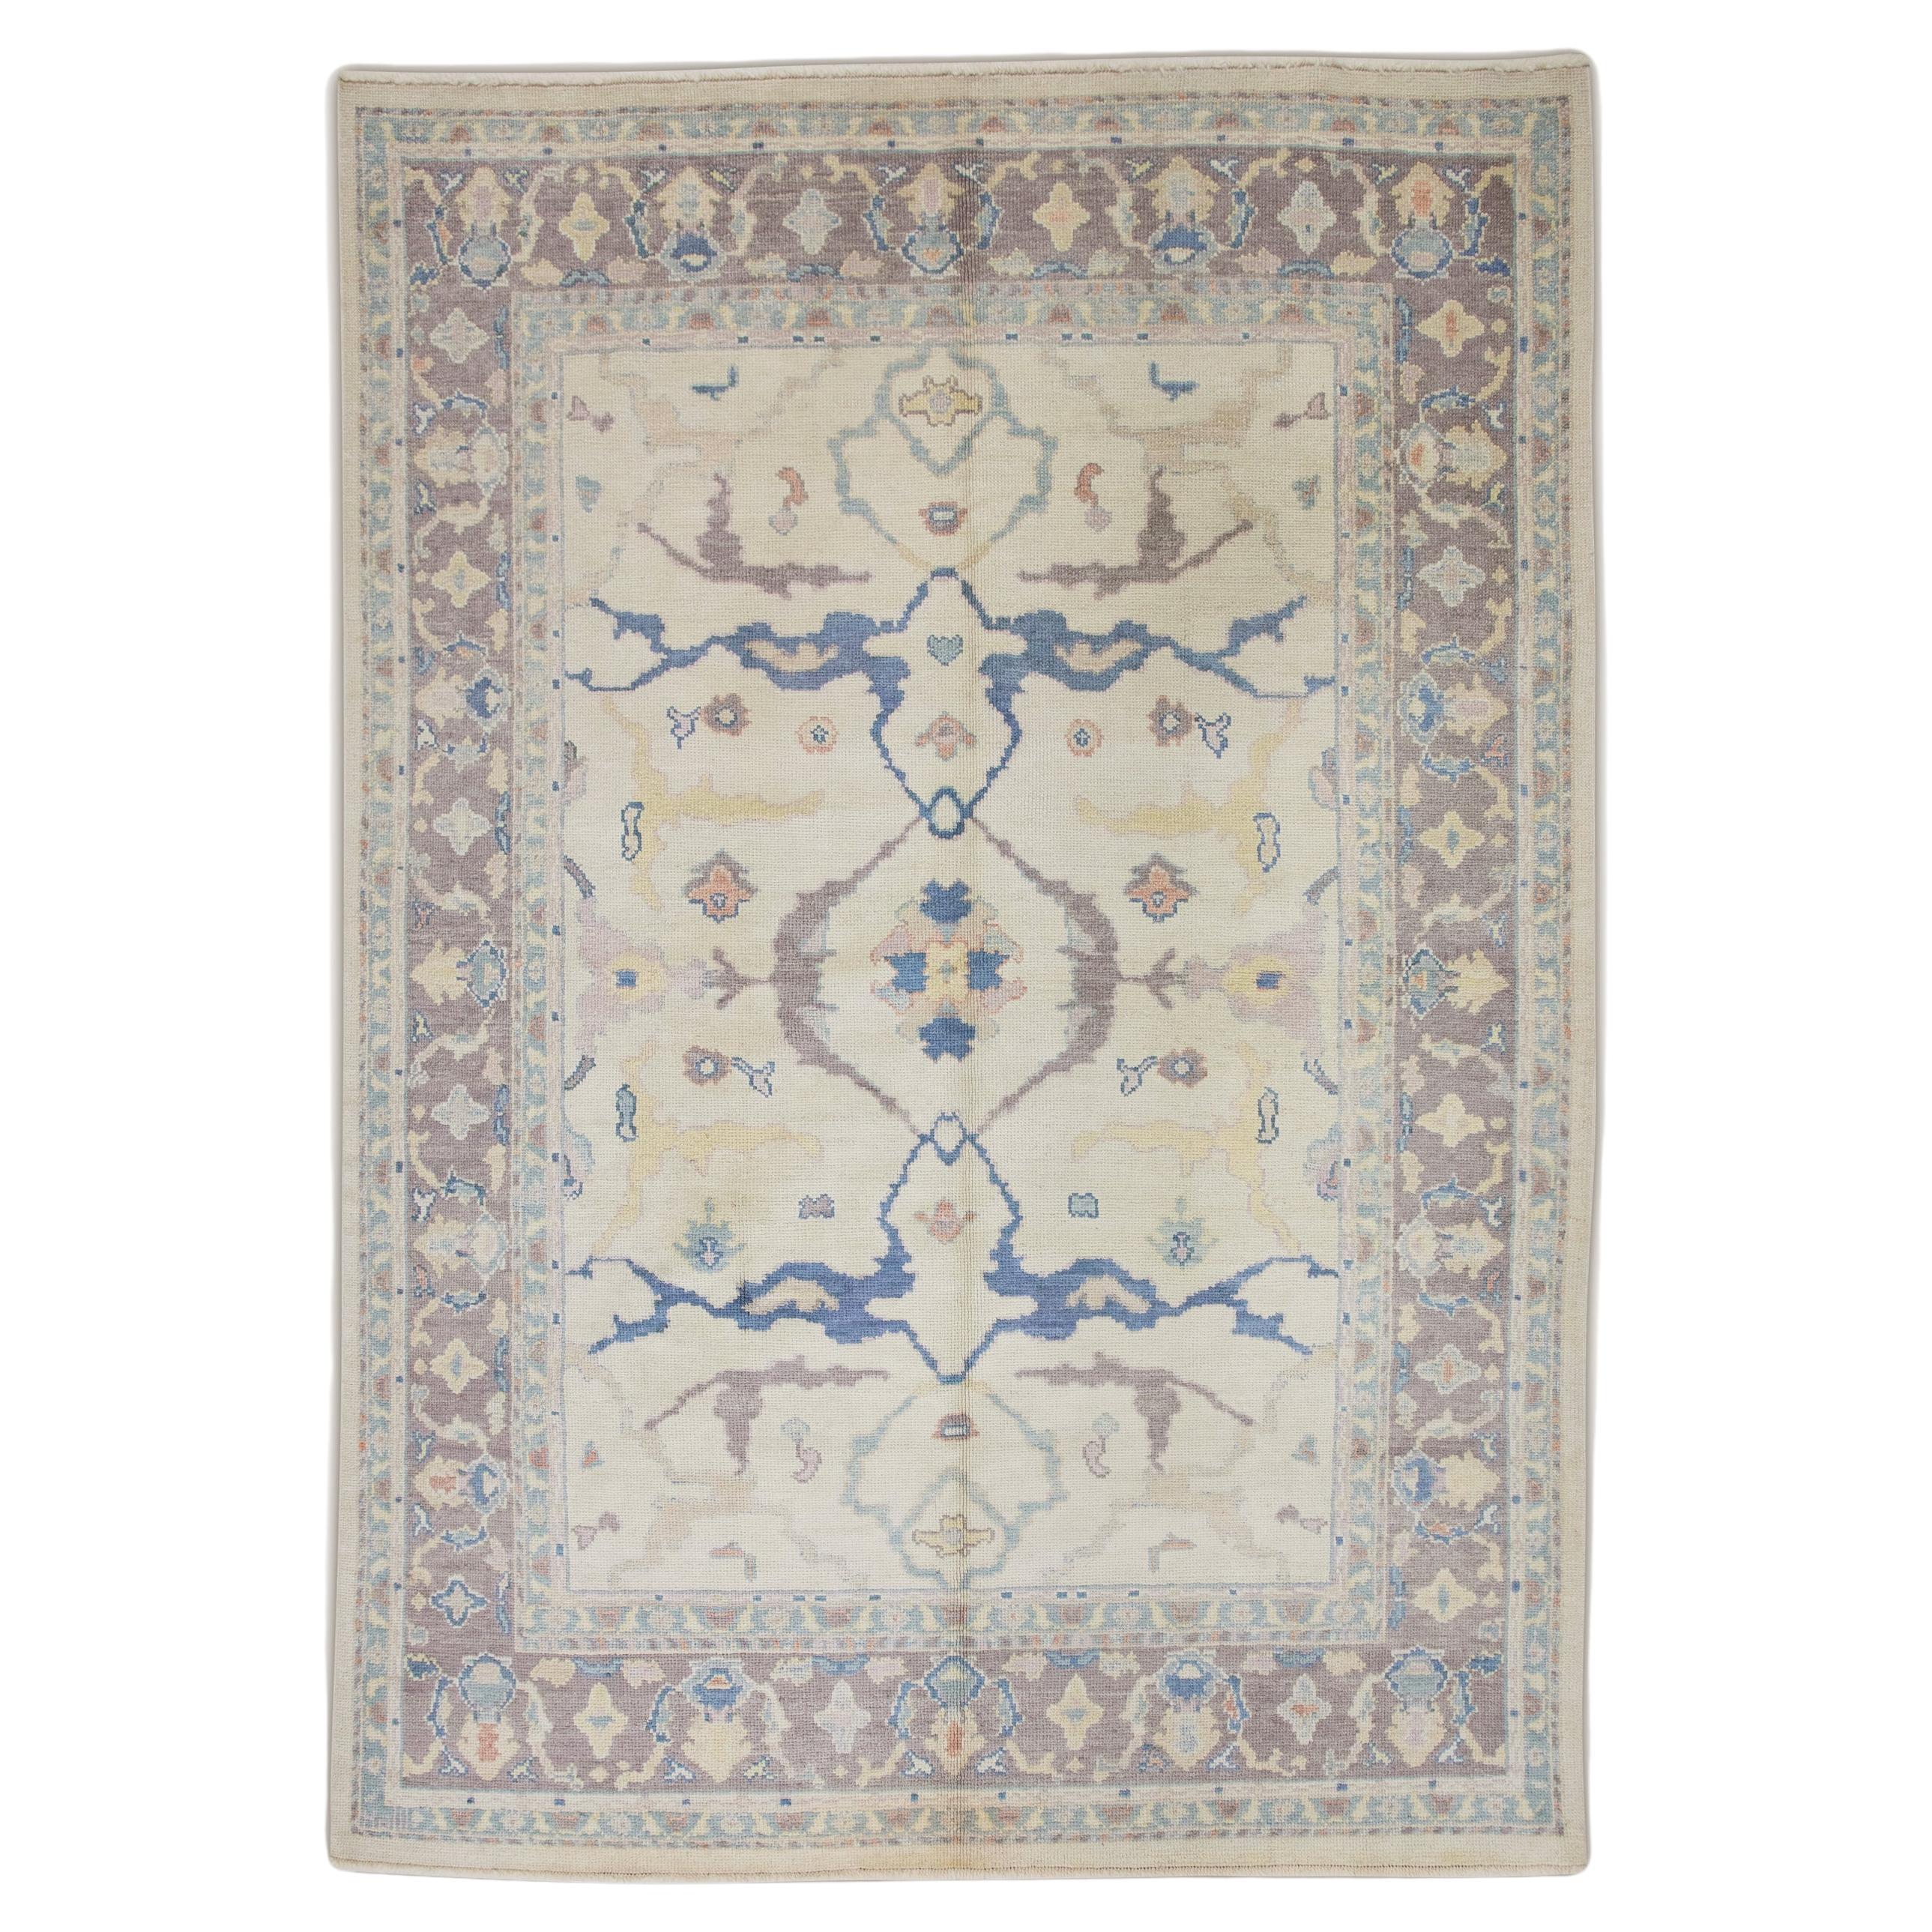 Mauve and Blue Floral Handwoven Wool Turkish Oushak Rug 6'11" x 10' For Sale